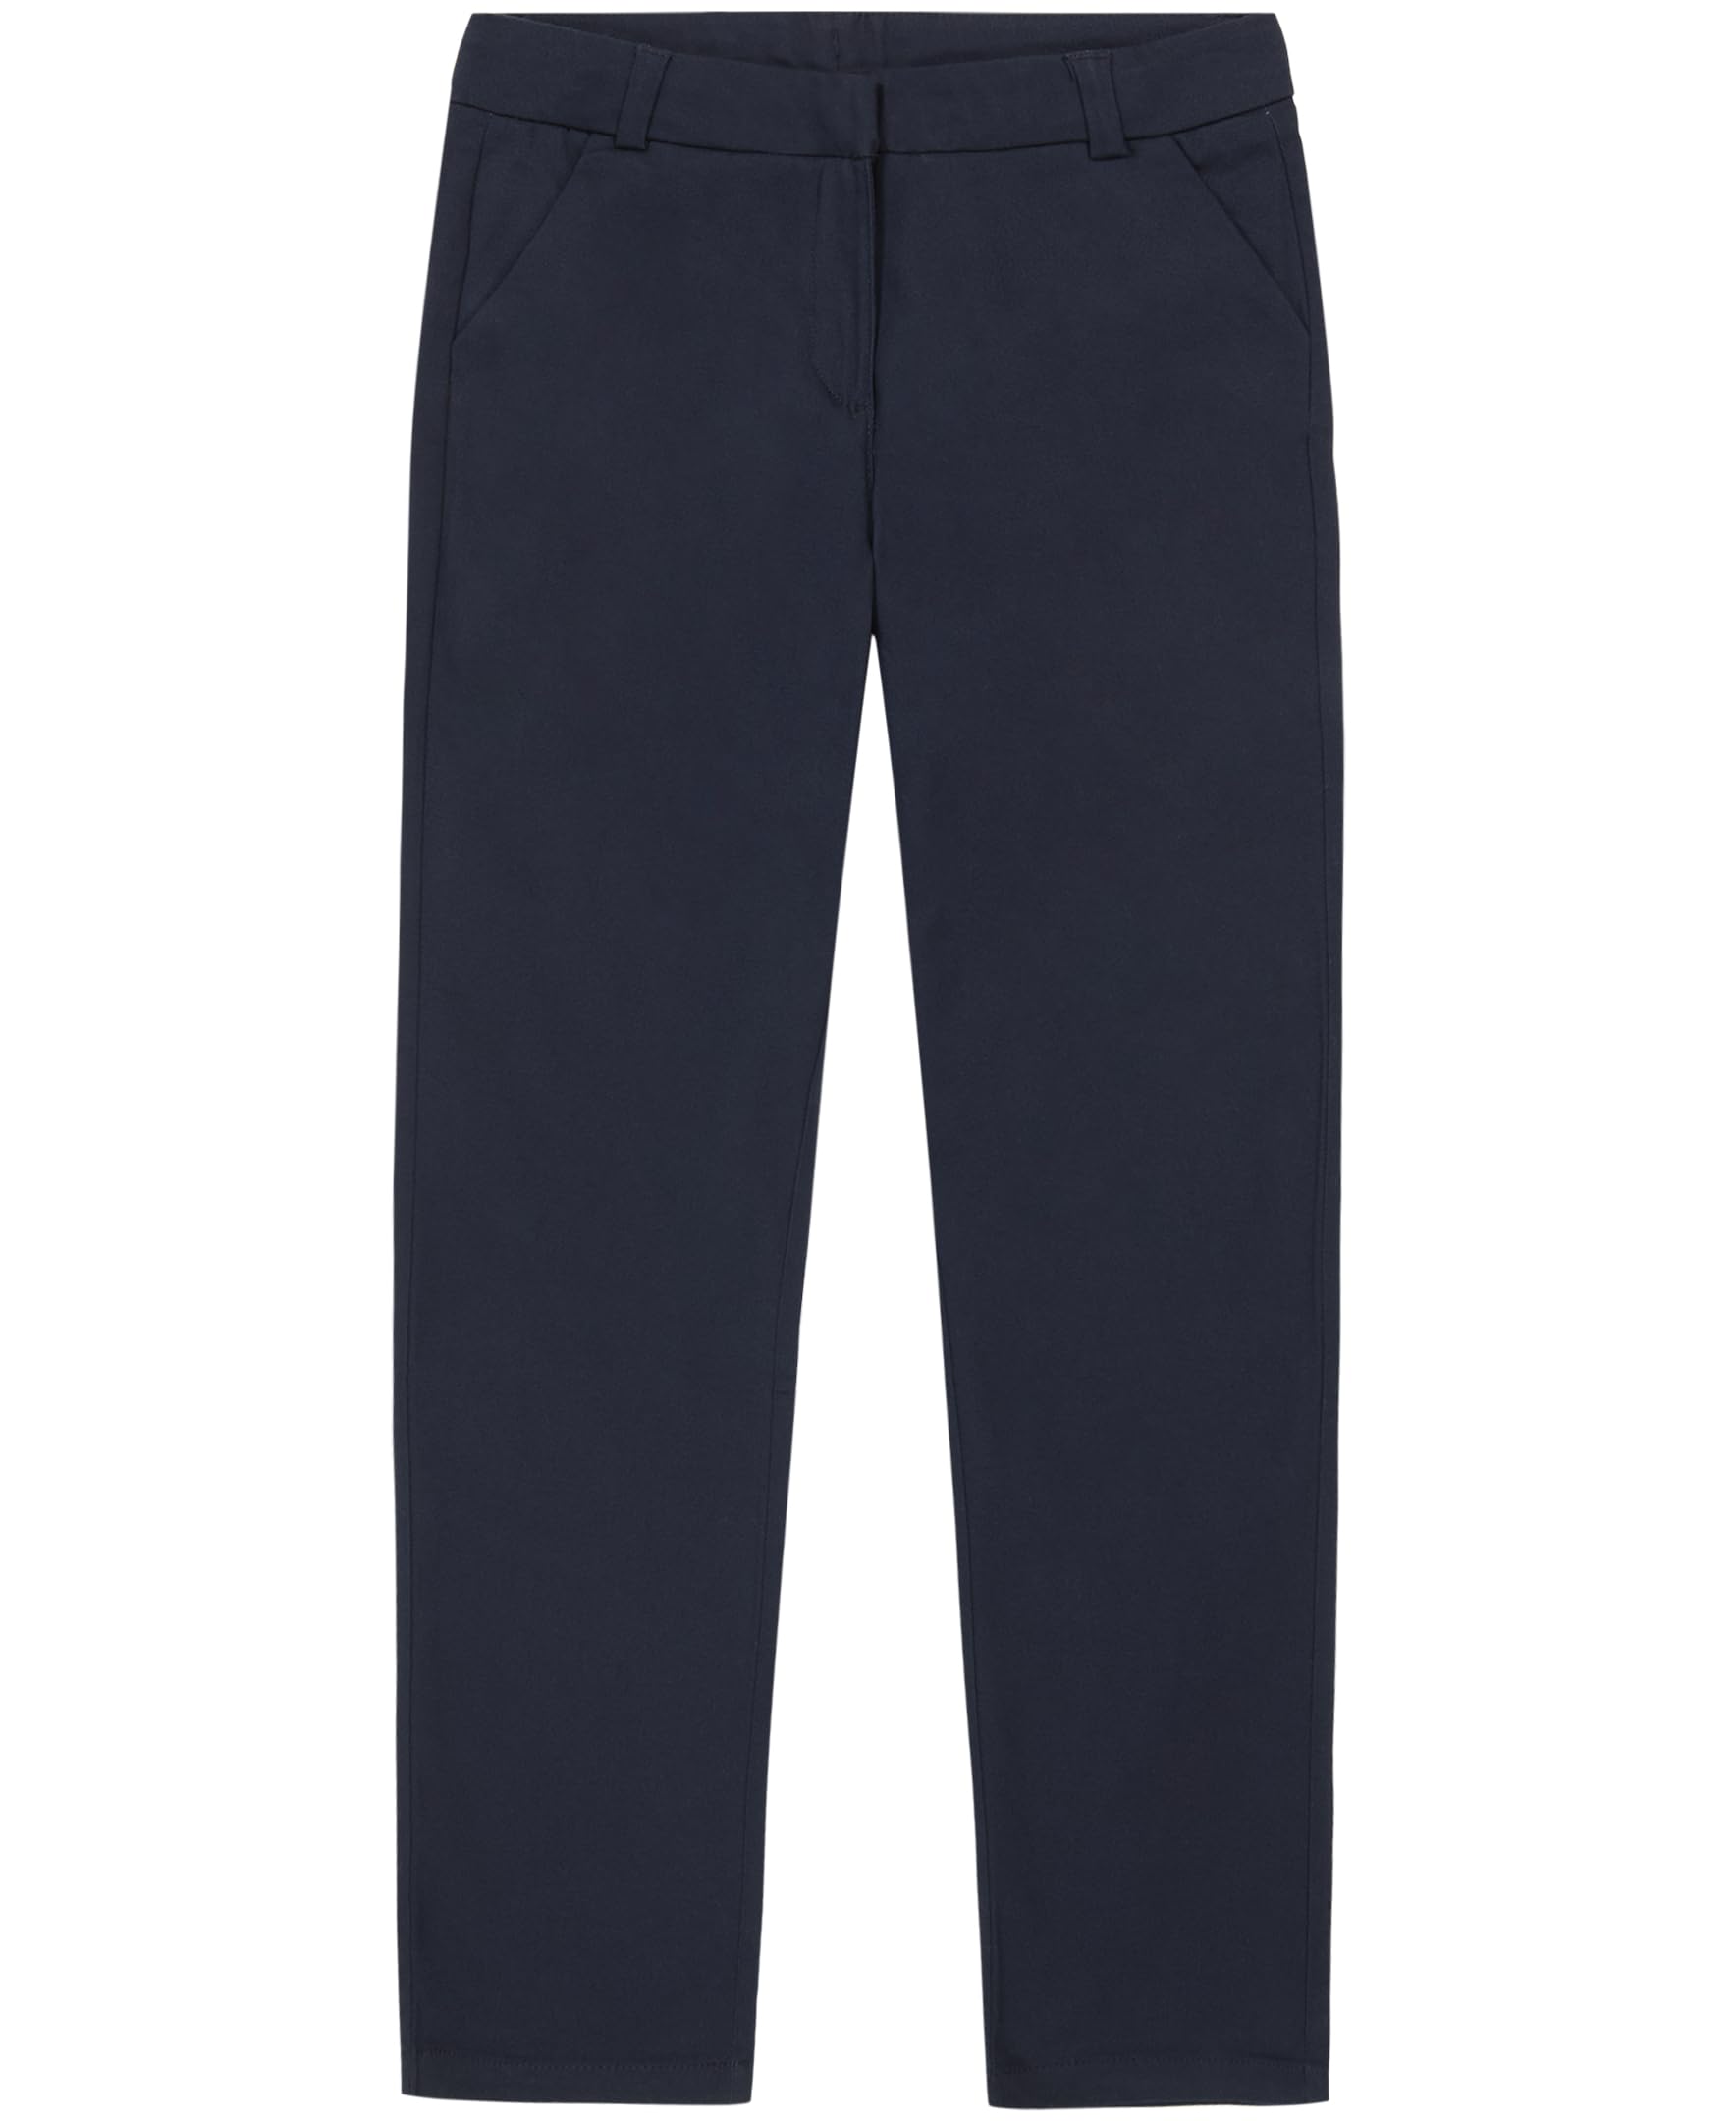 IZOD Girls' School Uniform Twill Skinny Pants, Made with Stretch Performance Material, Wrinkle & Fade Resistant